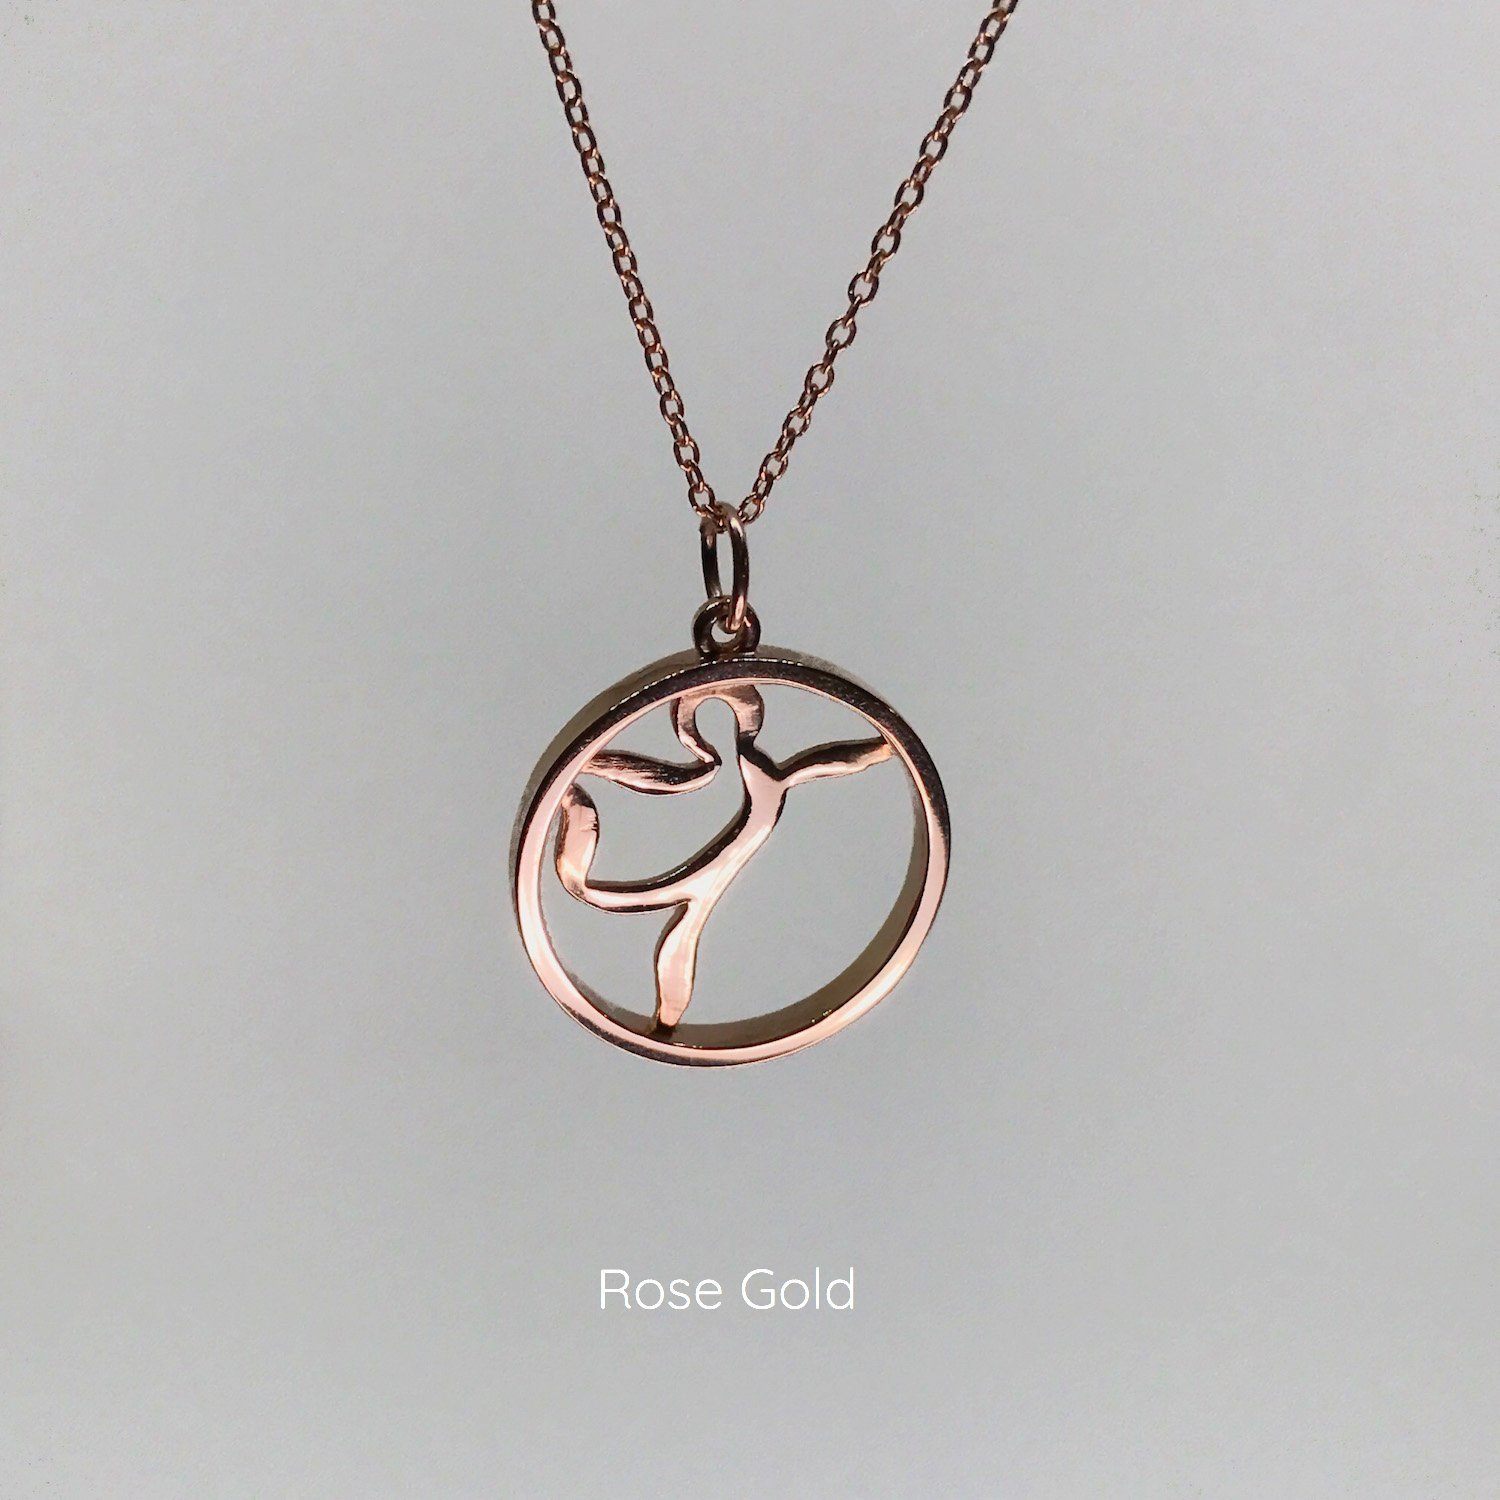 Rose Gold Yoga Necklace and Dancer Pendant  